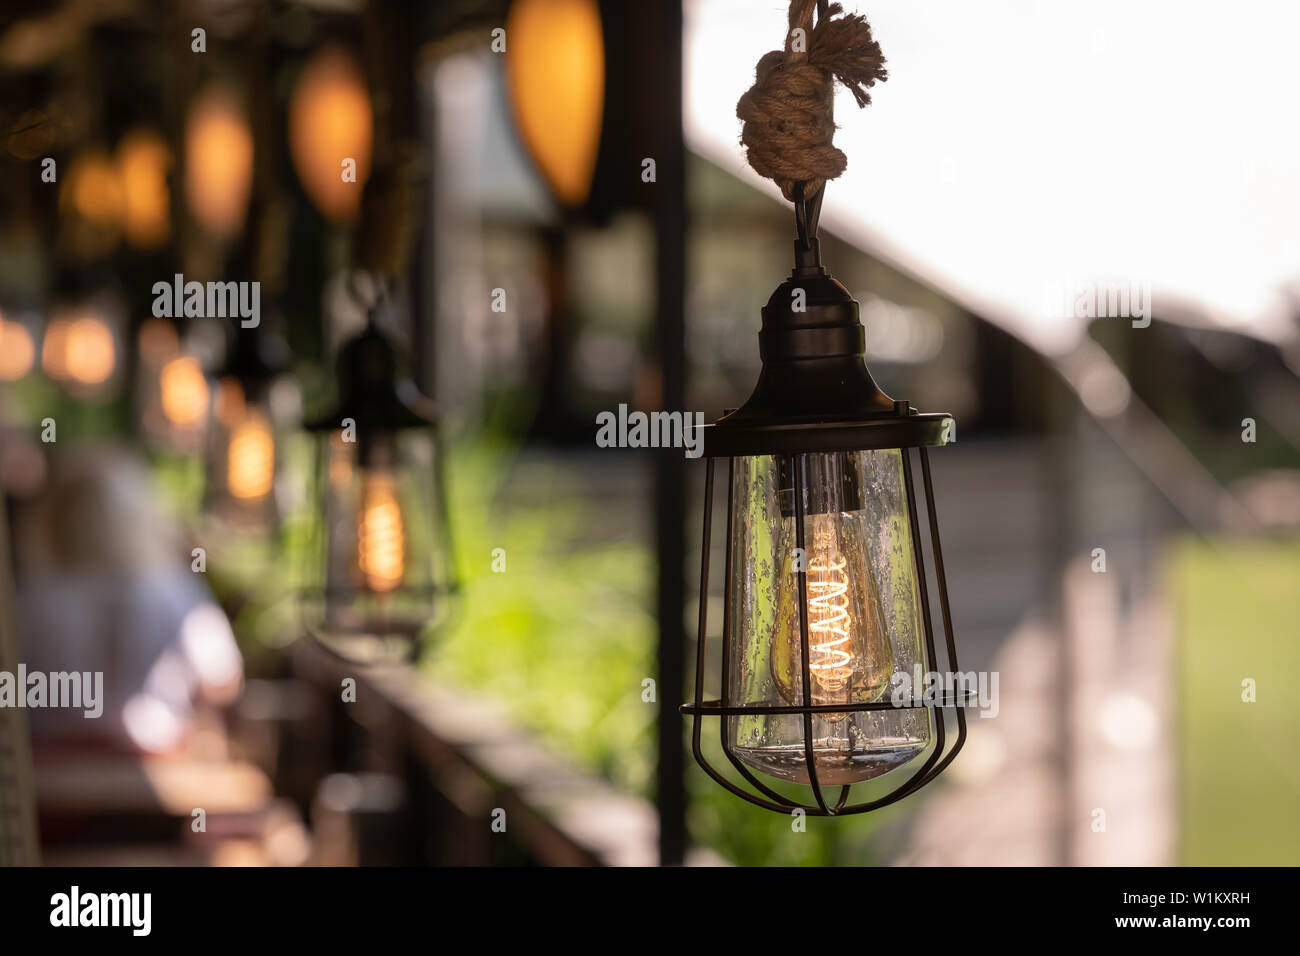 Description: Vintage decor lighting. Metal lamp with antique lamp hanging on a thick rope Stock Photo